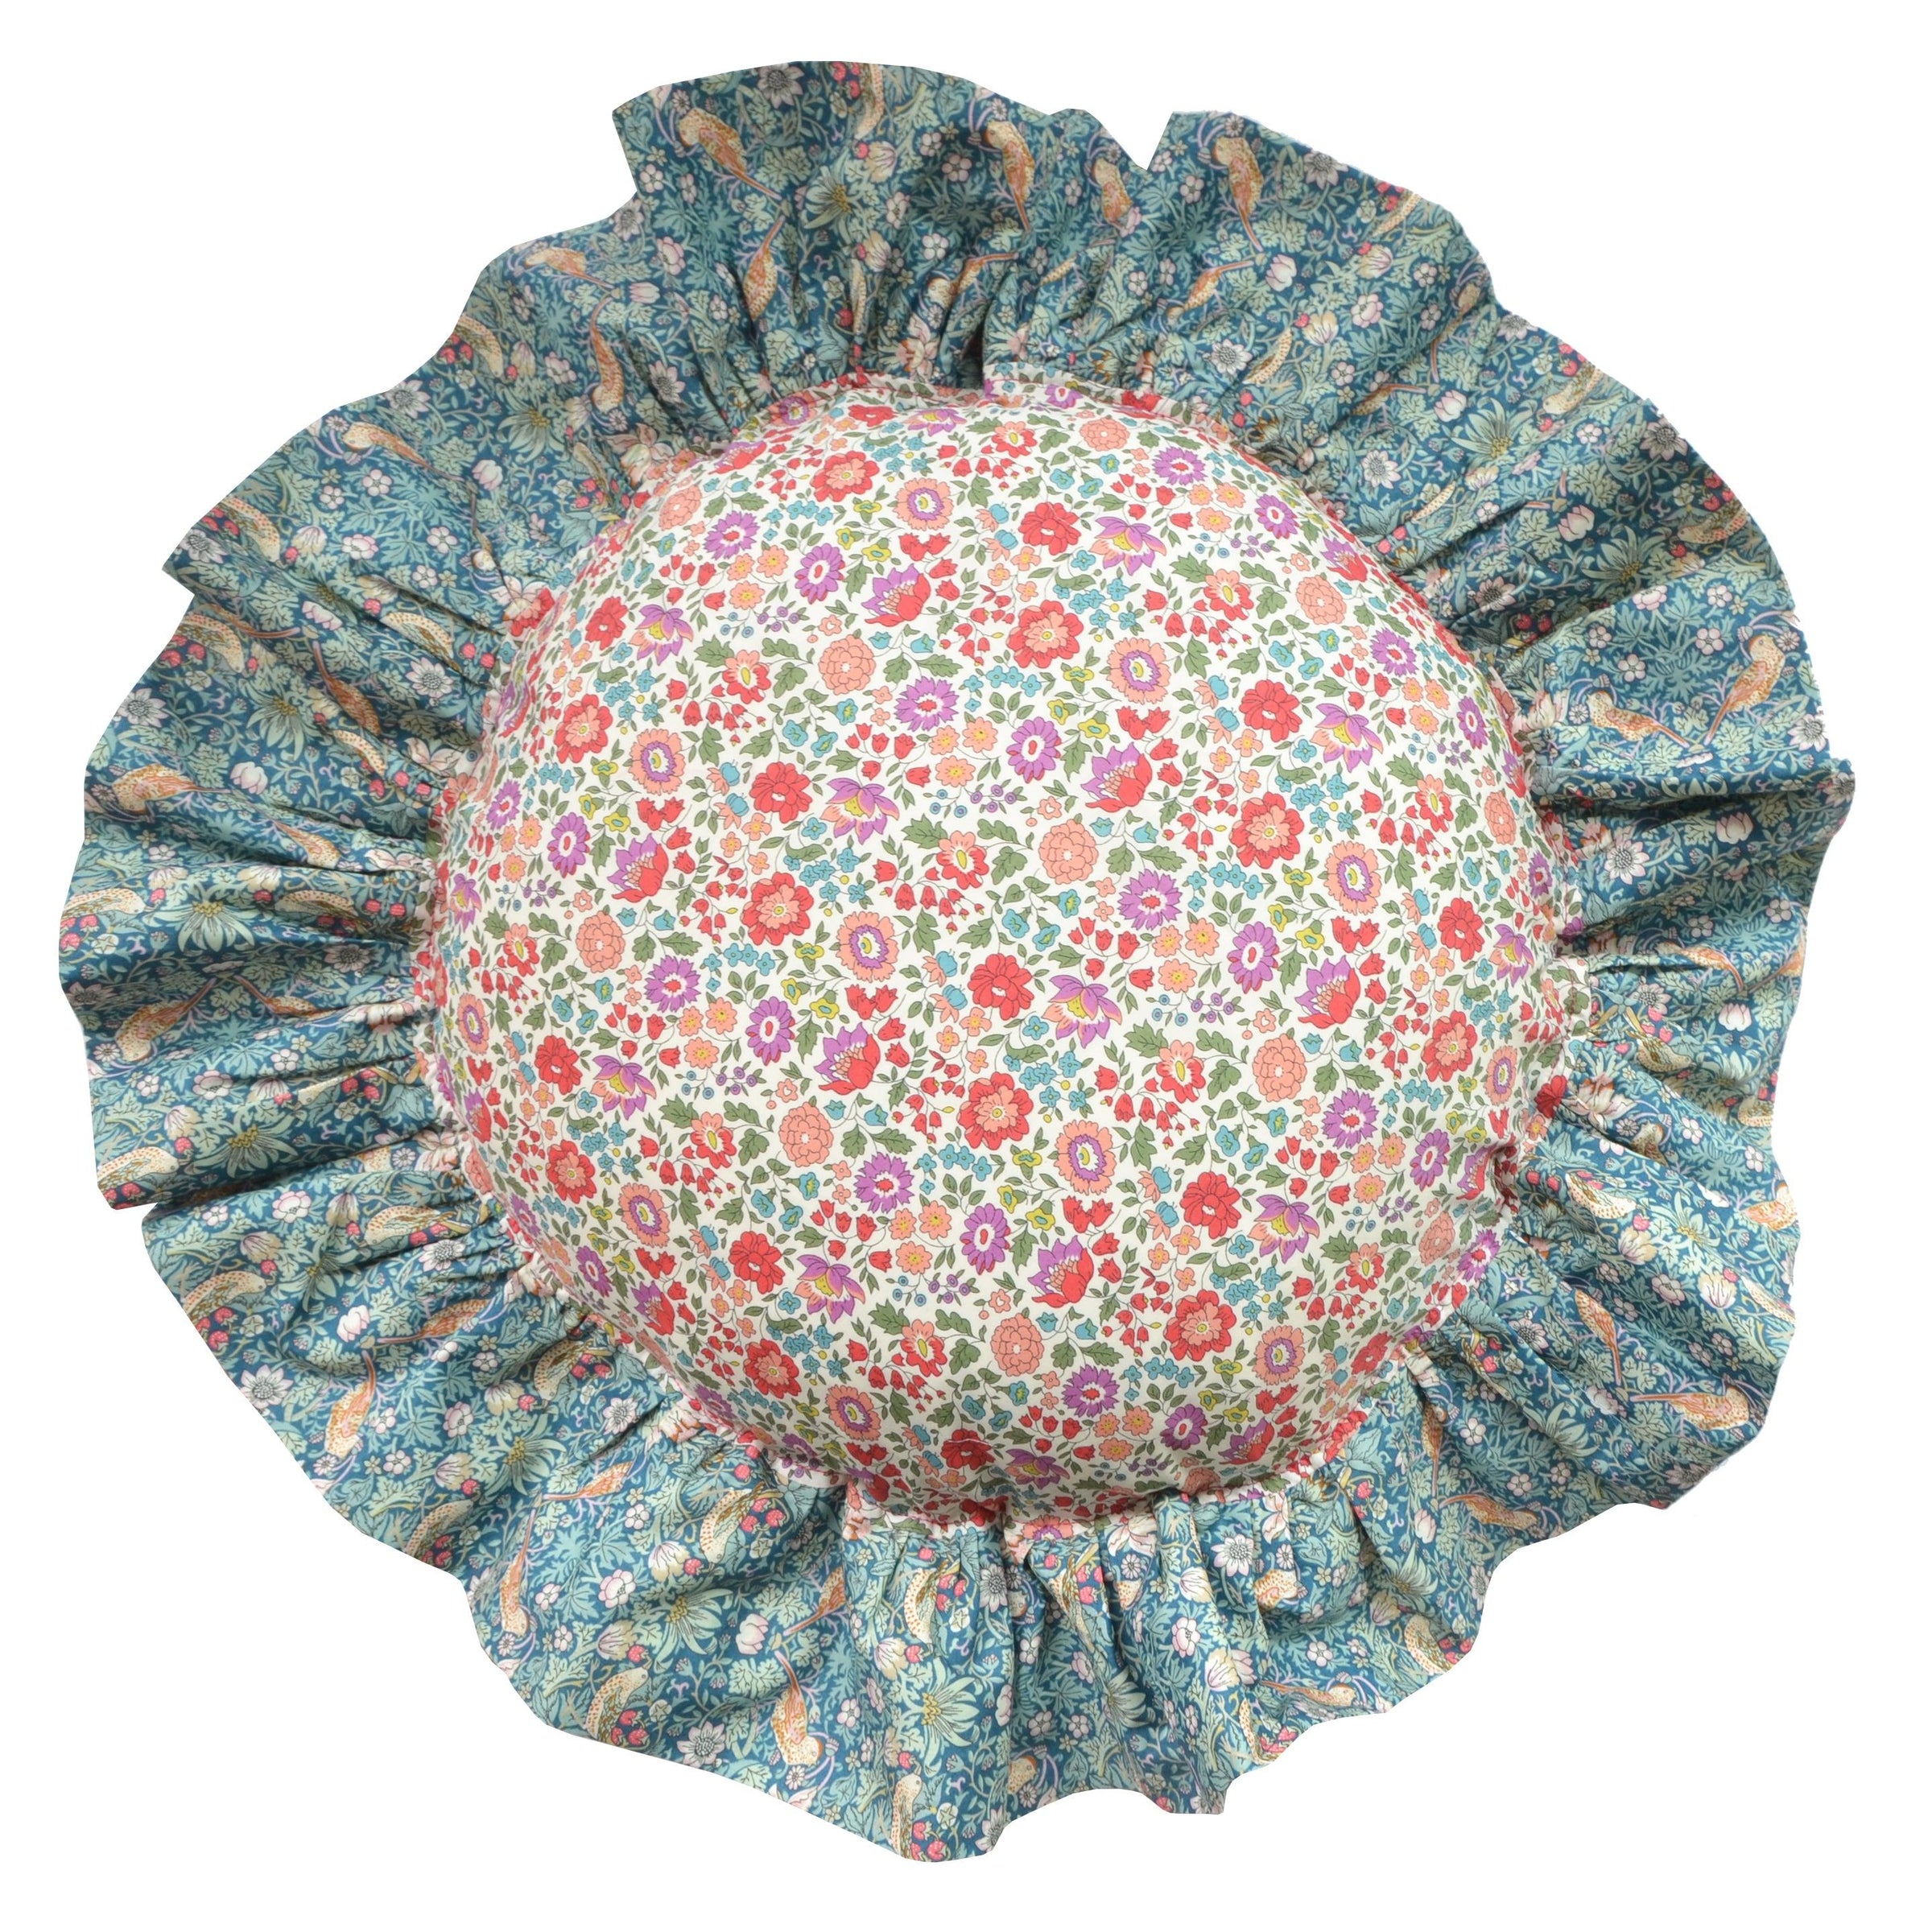 Ruffle Cushion made with Liberty Fabric STRAWBERRY THIEF & D'ANJO - Coco & Wolf